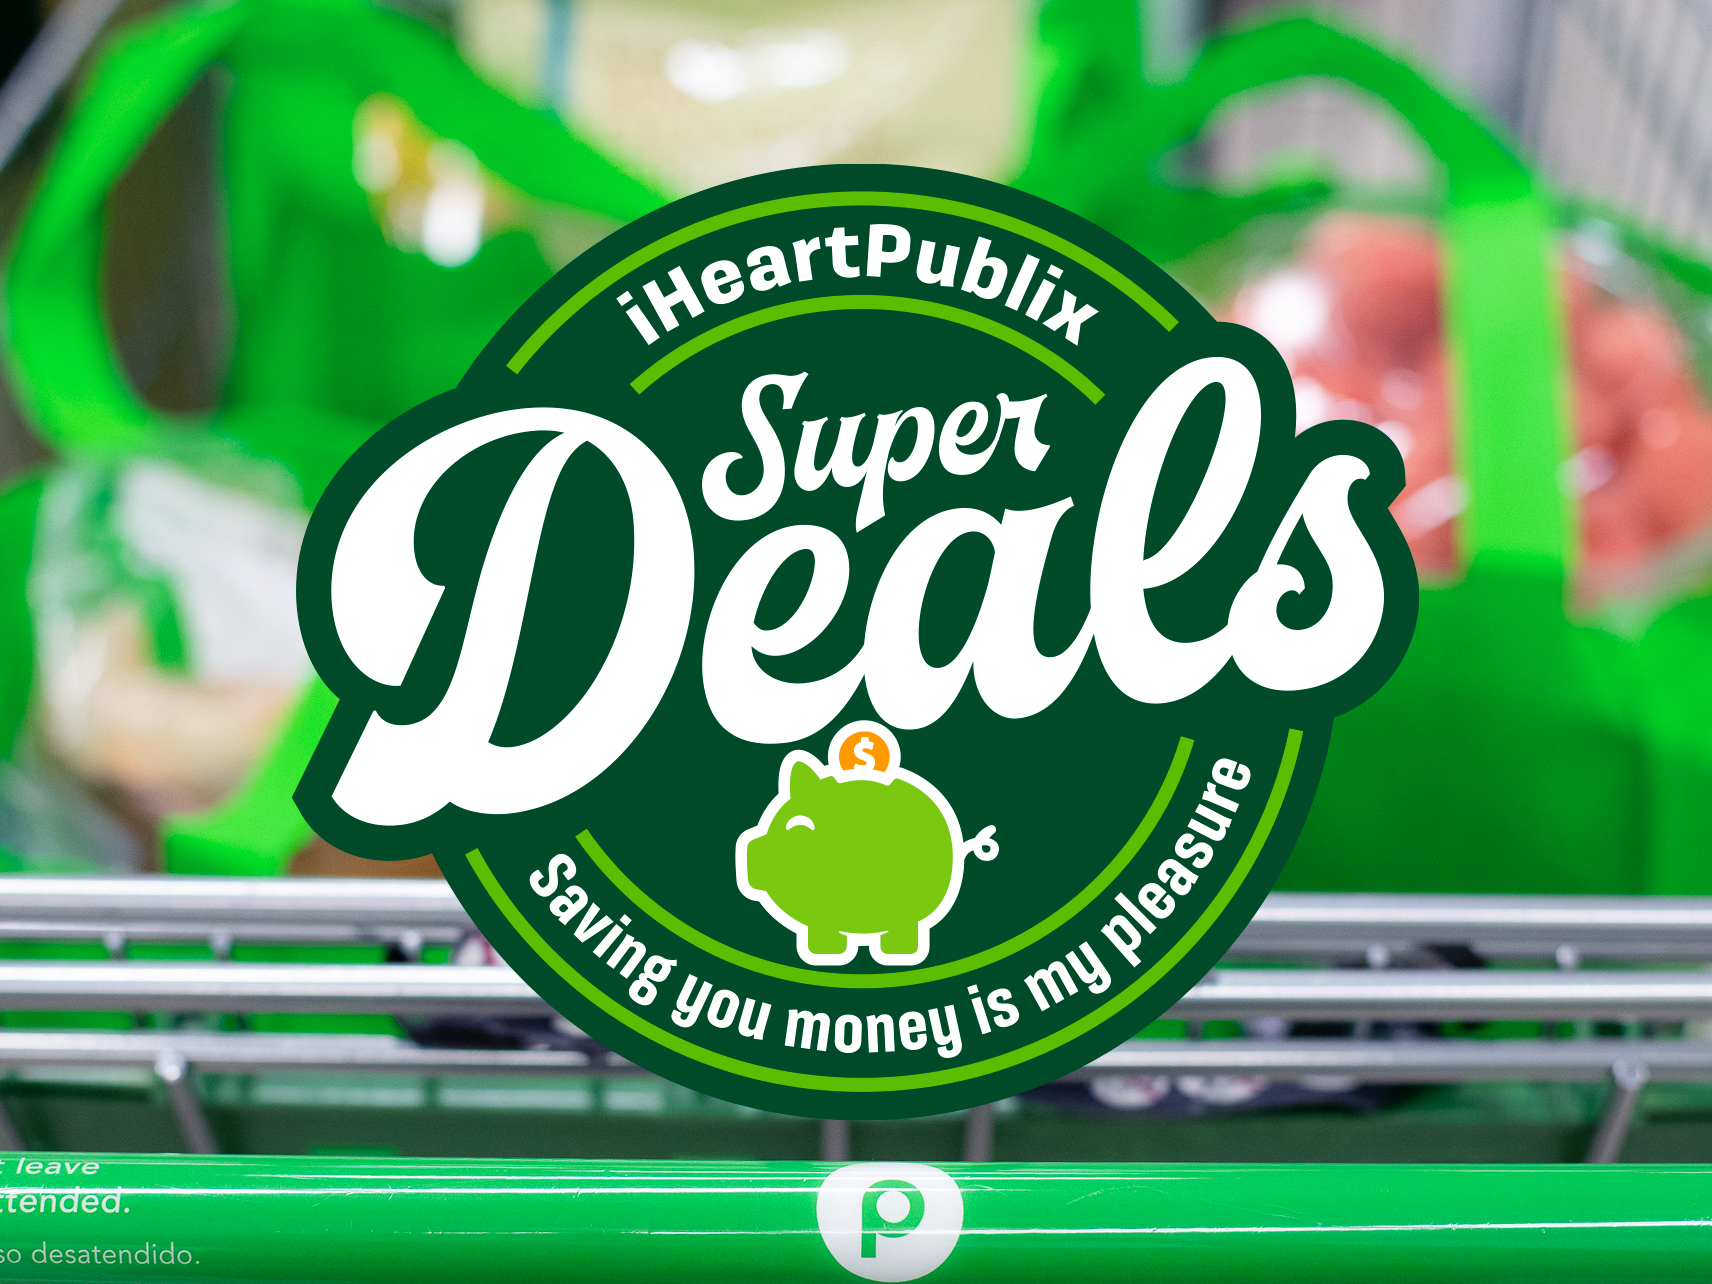 Publix Super Deals Week Of 5/18 to 5/24 (5/17 to 5/23 For Some)